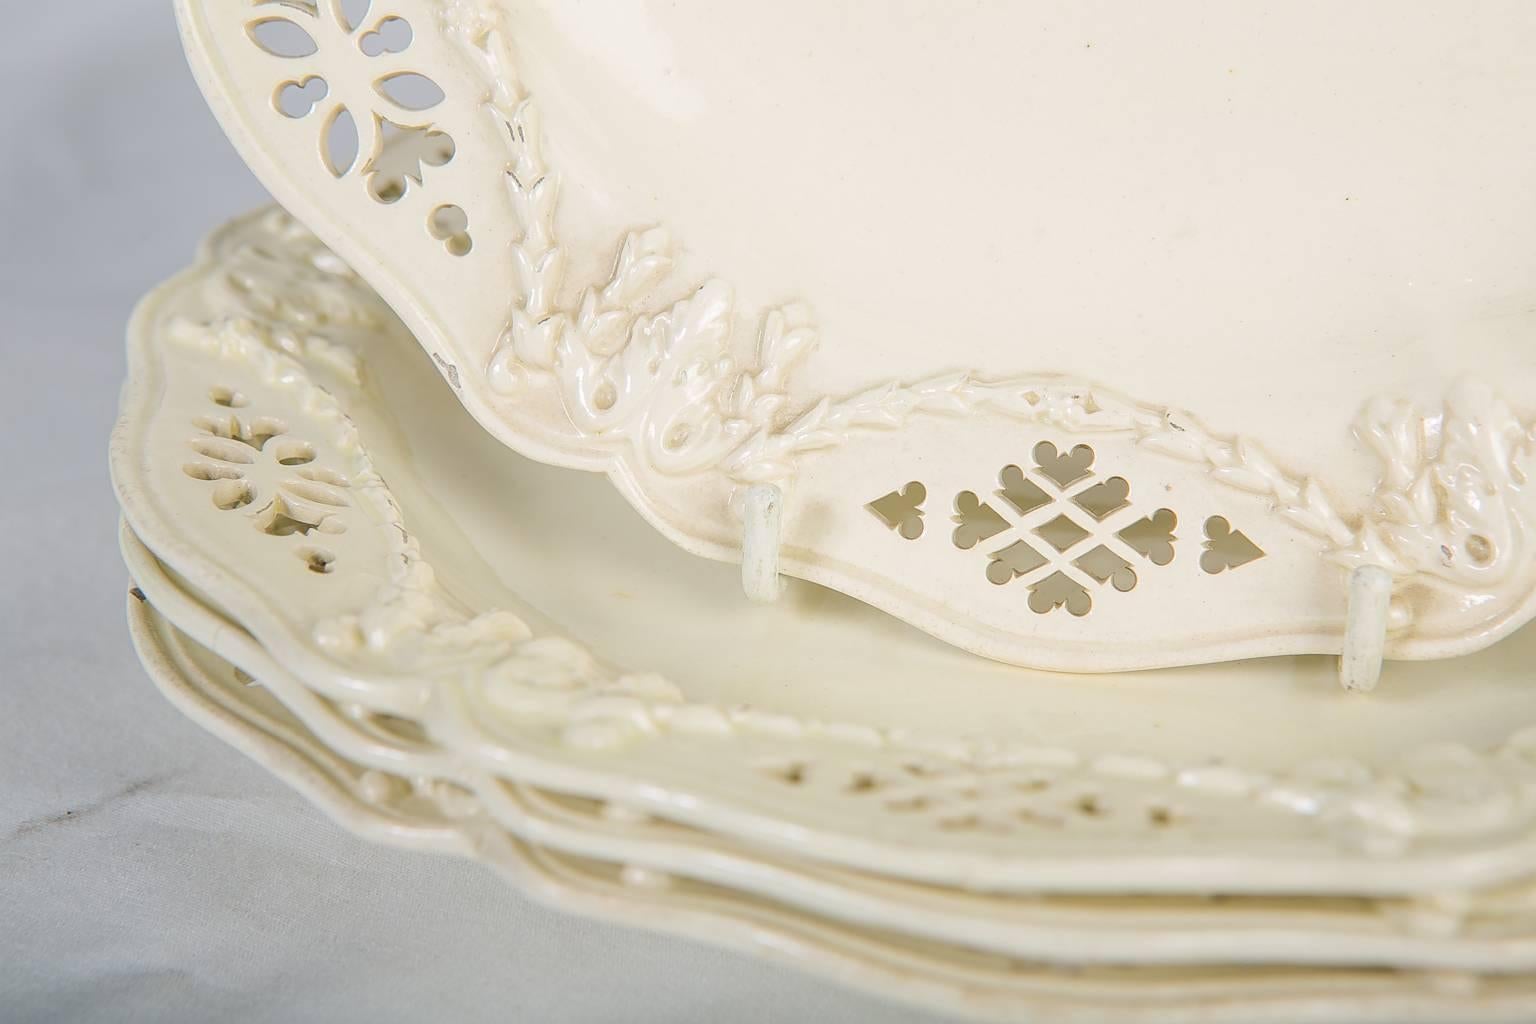 Great Britain (UK) Pierced Creamware Dishes 18th Century, a Set of Six